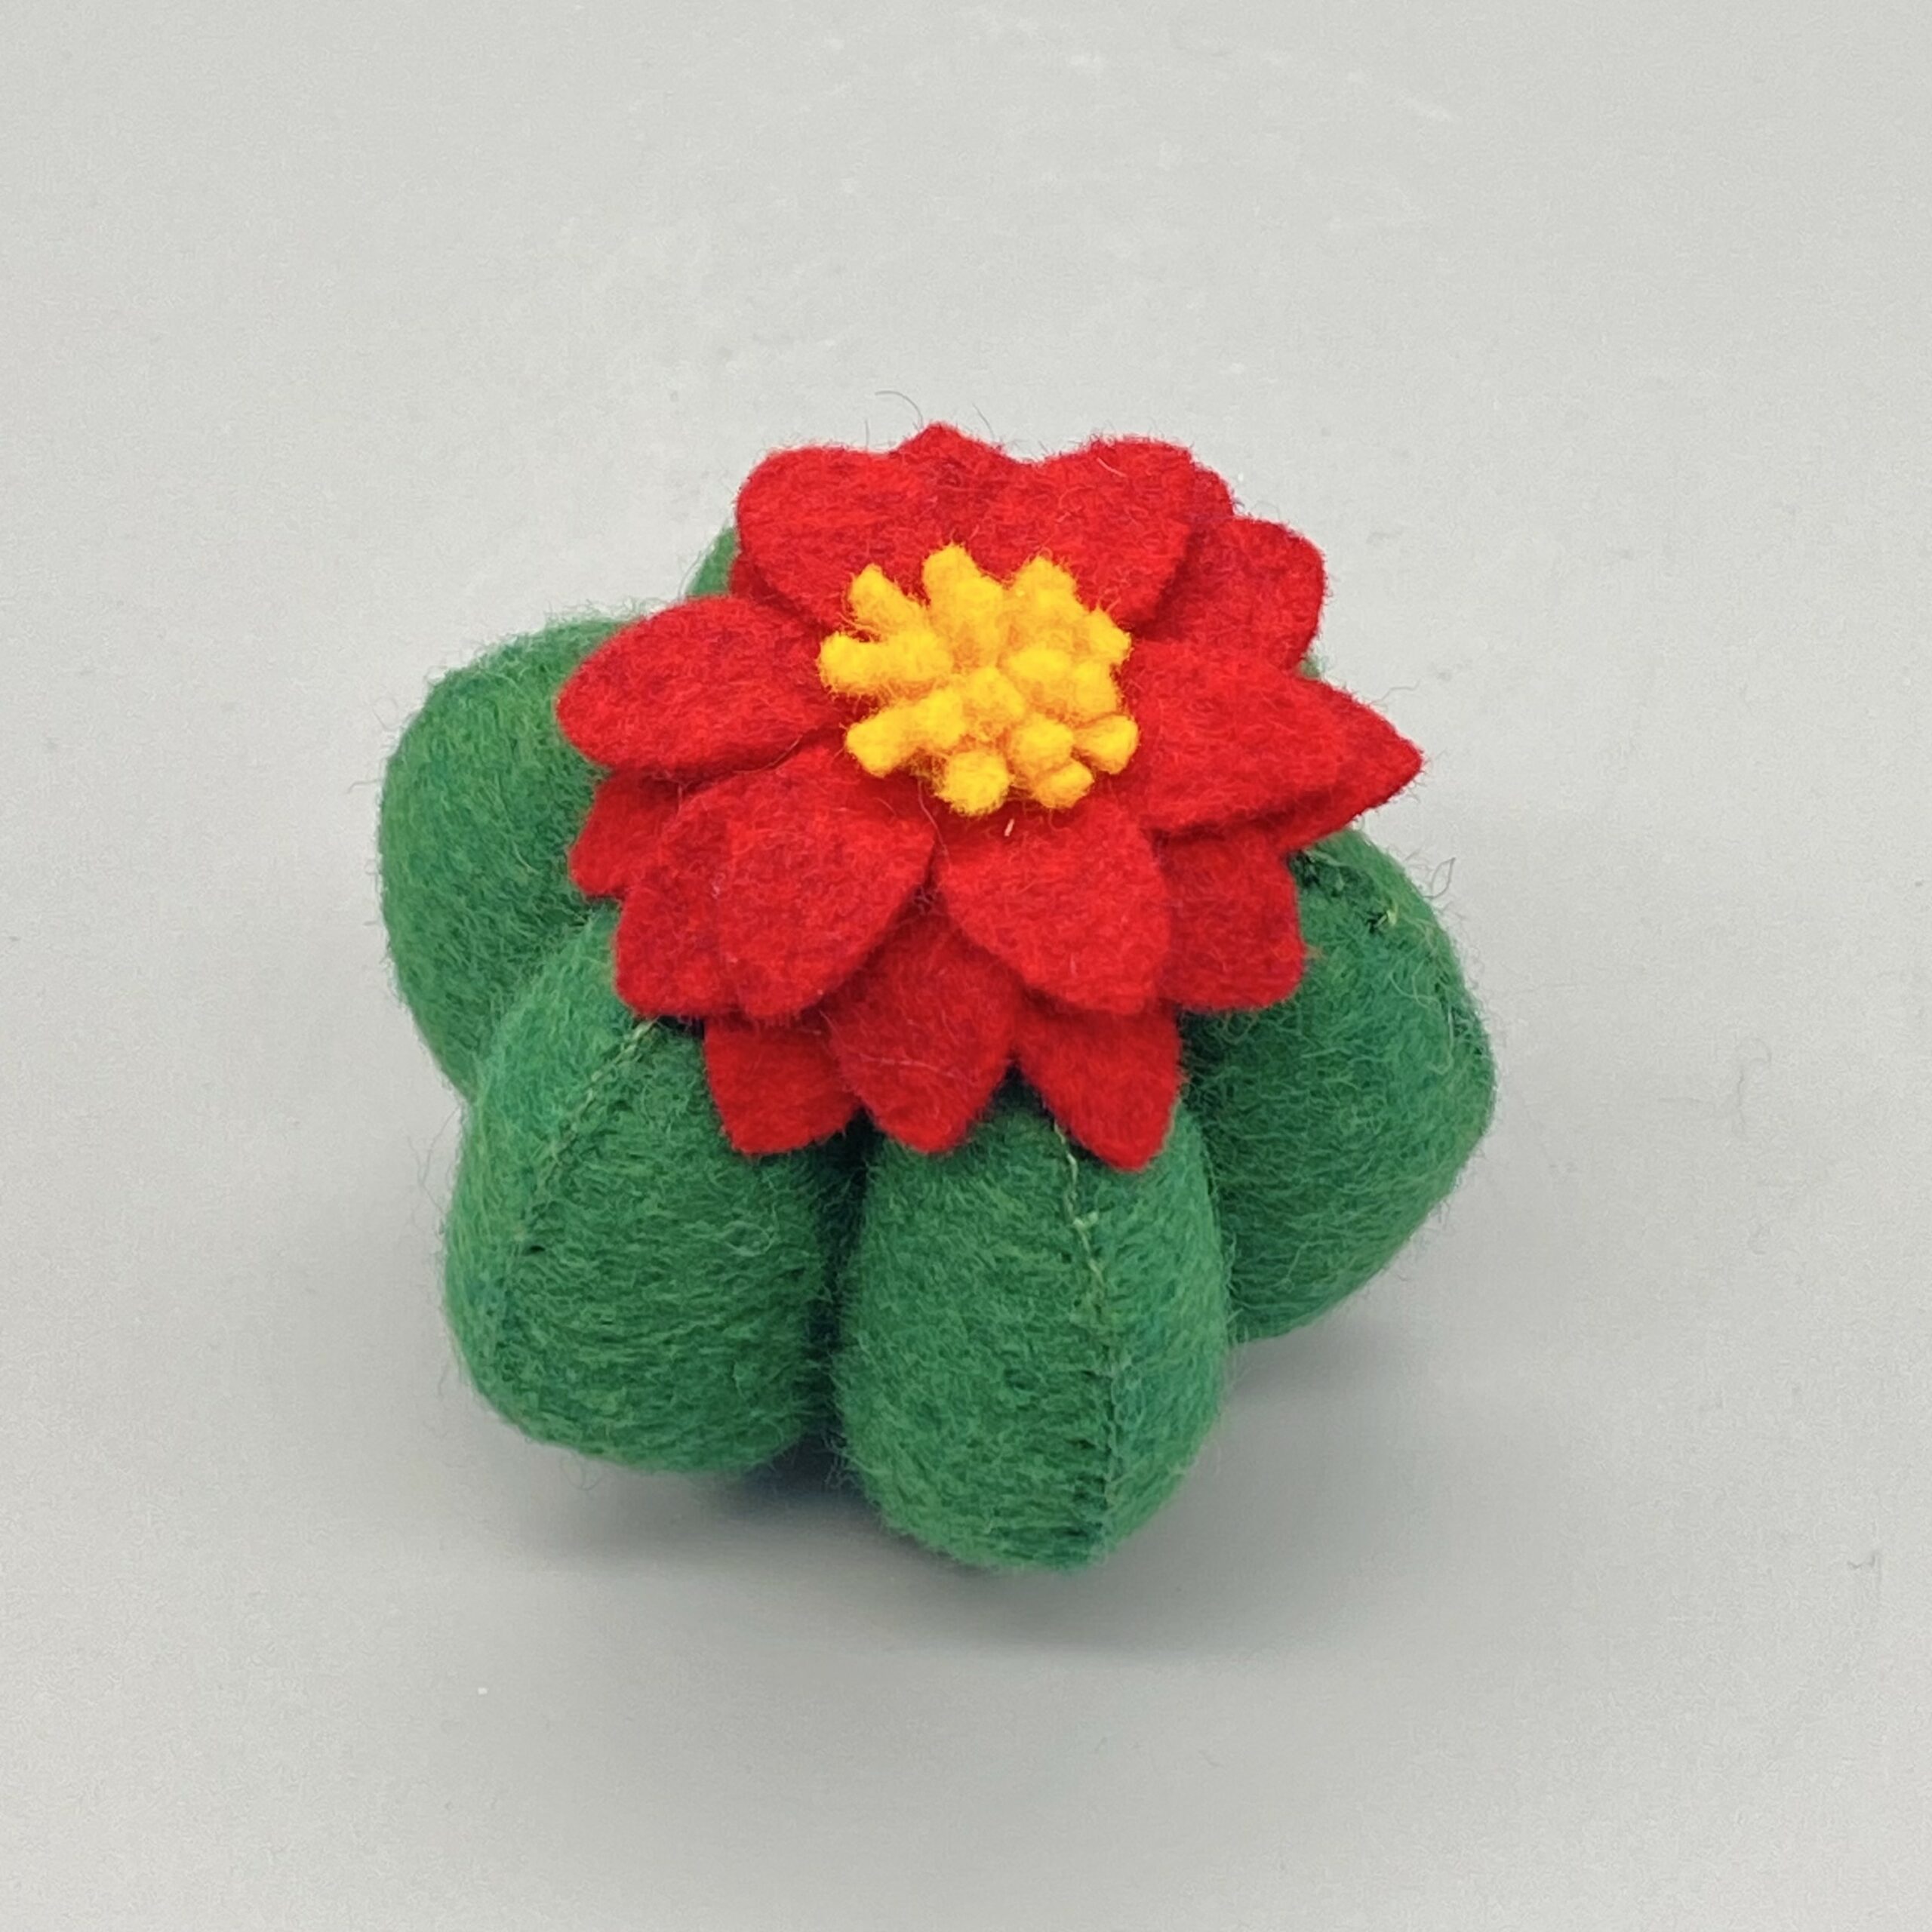 Featured image for “Hand Embroidered Cactus Pin Cushion”